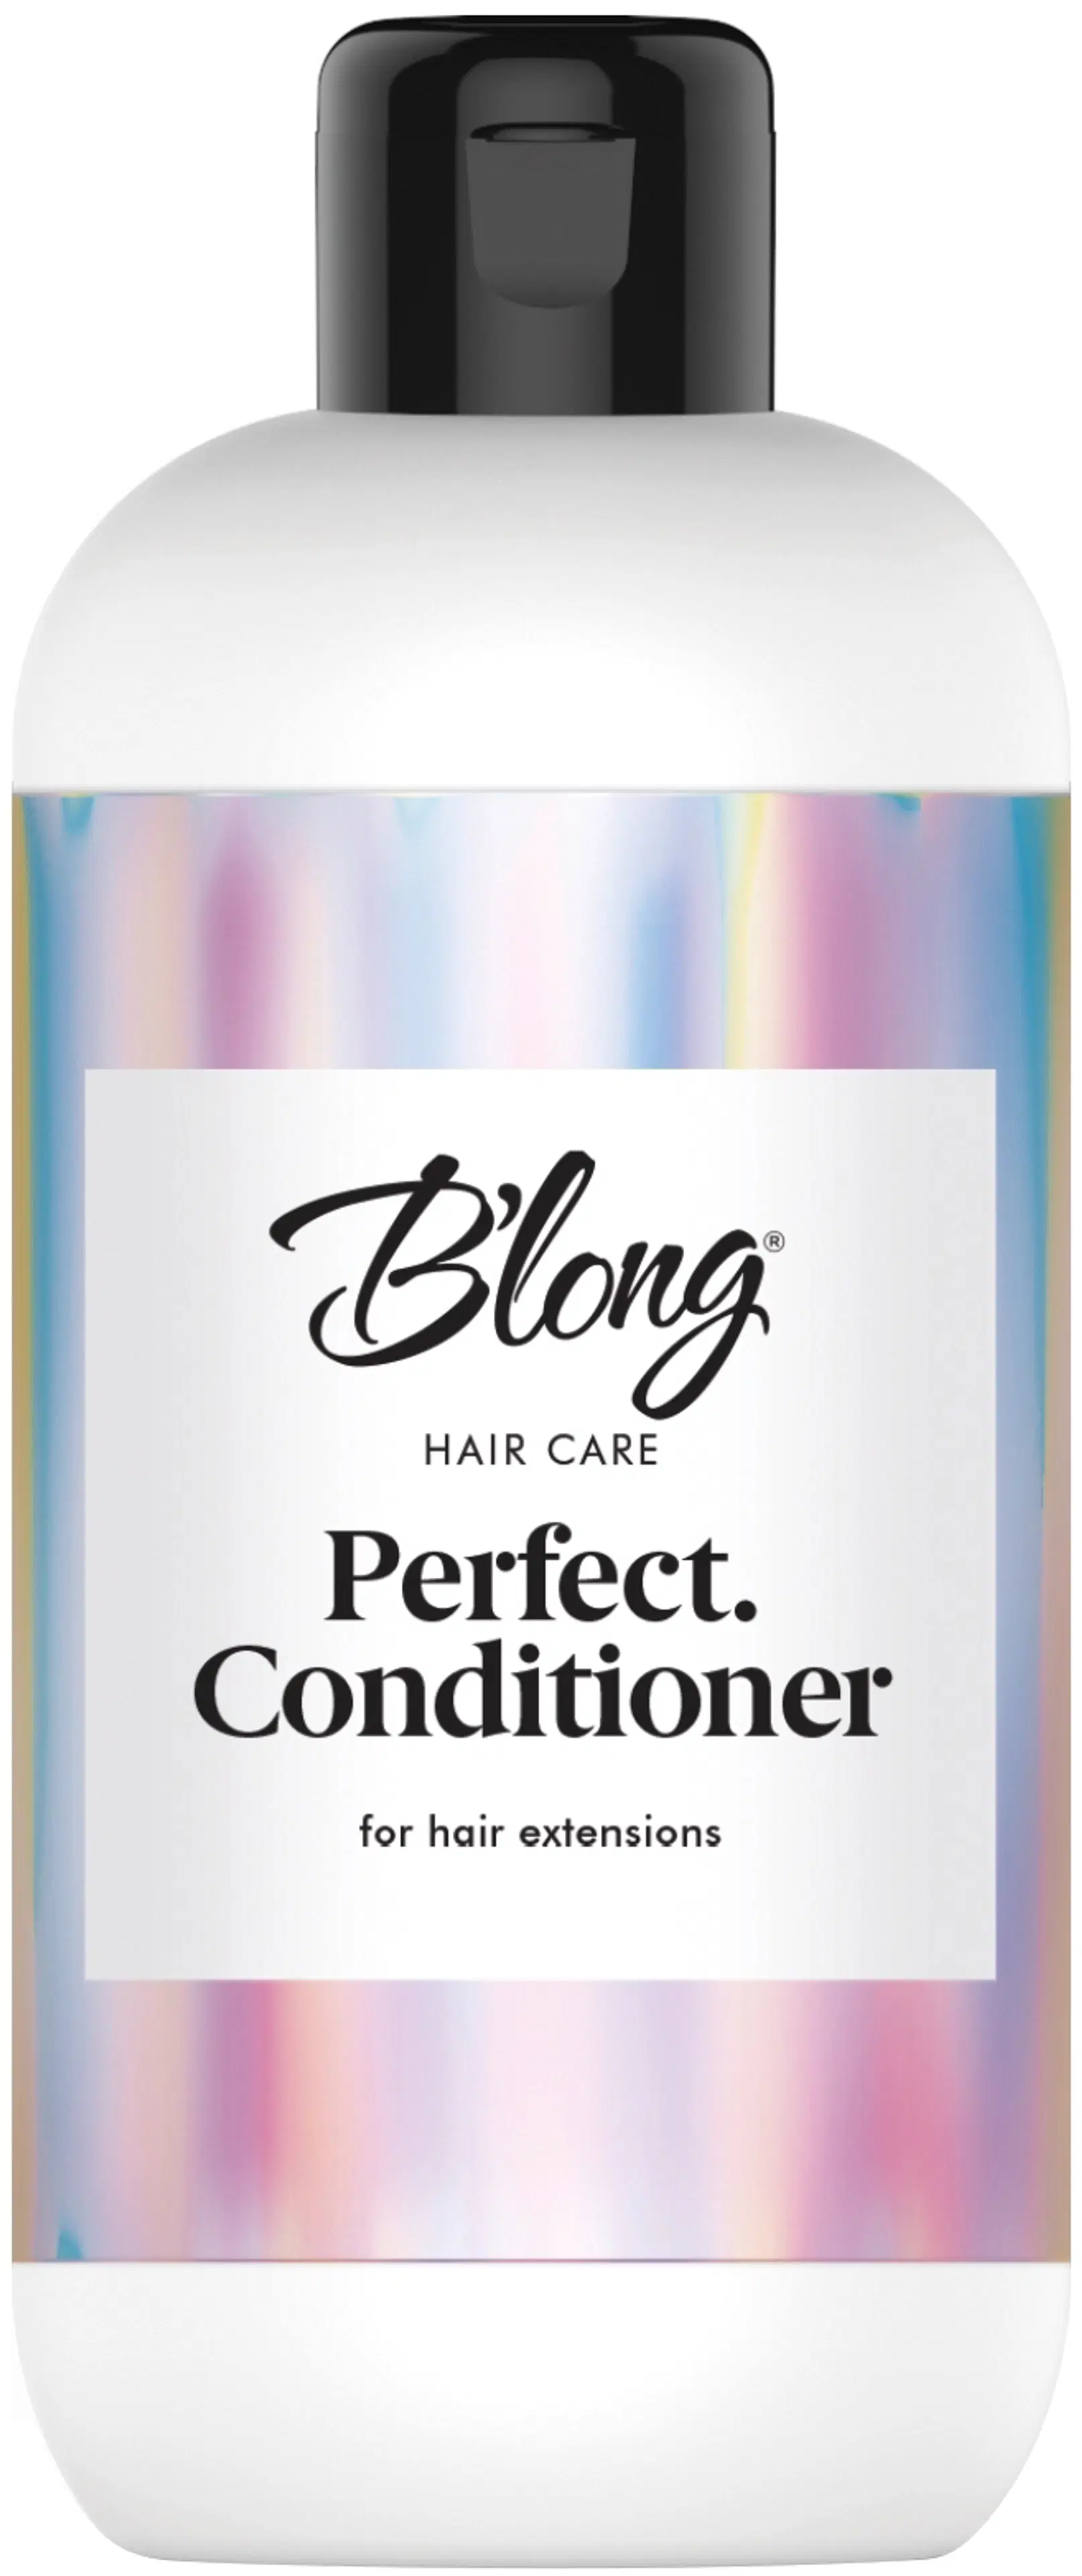 Blong Hair Care Perfect. Conditioner hoitoaine 300 ml